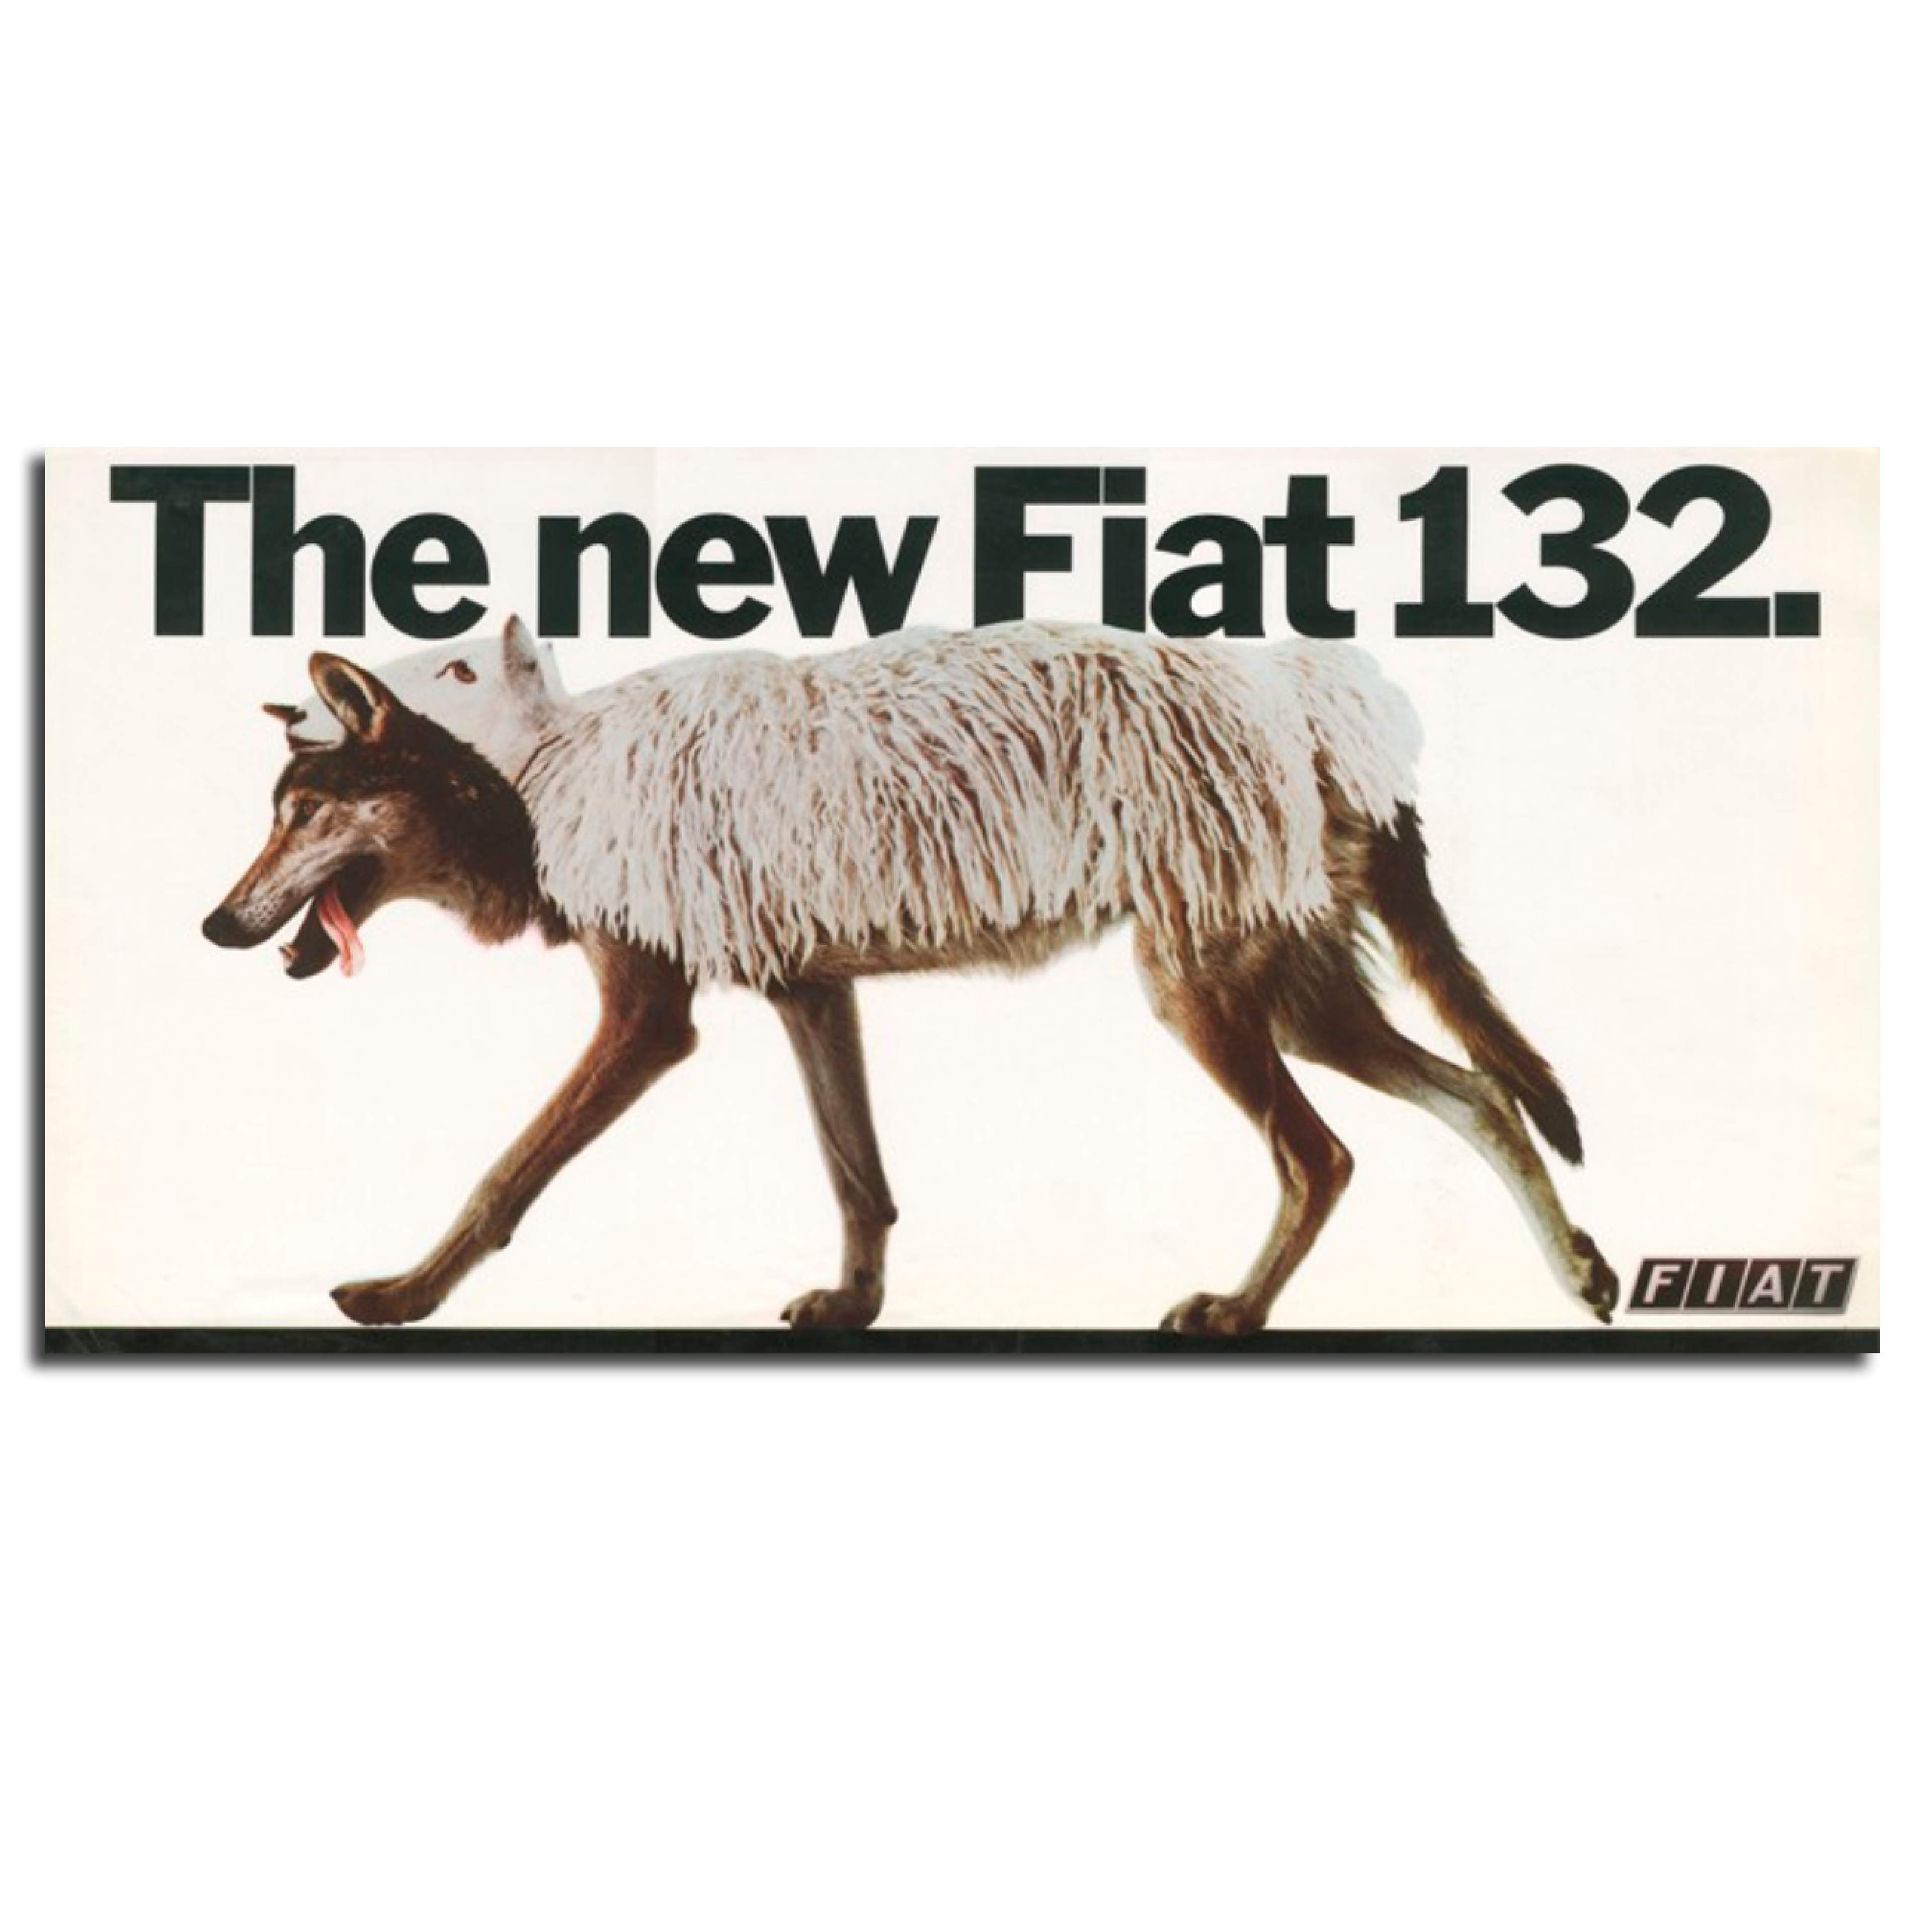 Photo montage of a wolf wearing sheep's clothing. Poster for the Fiat 132.